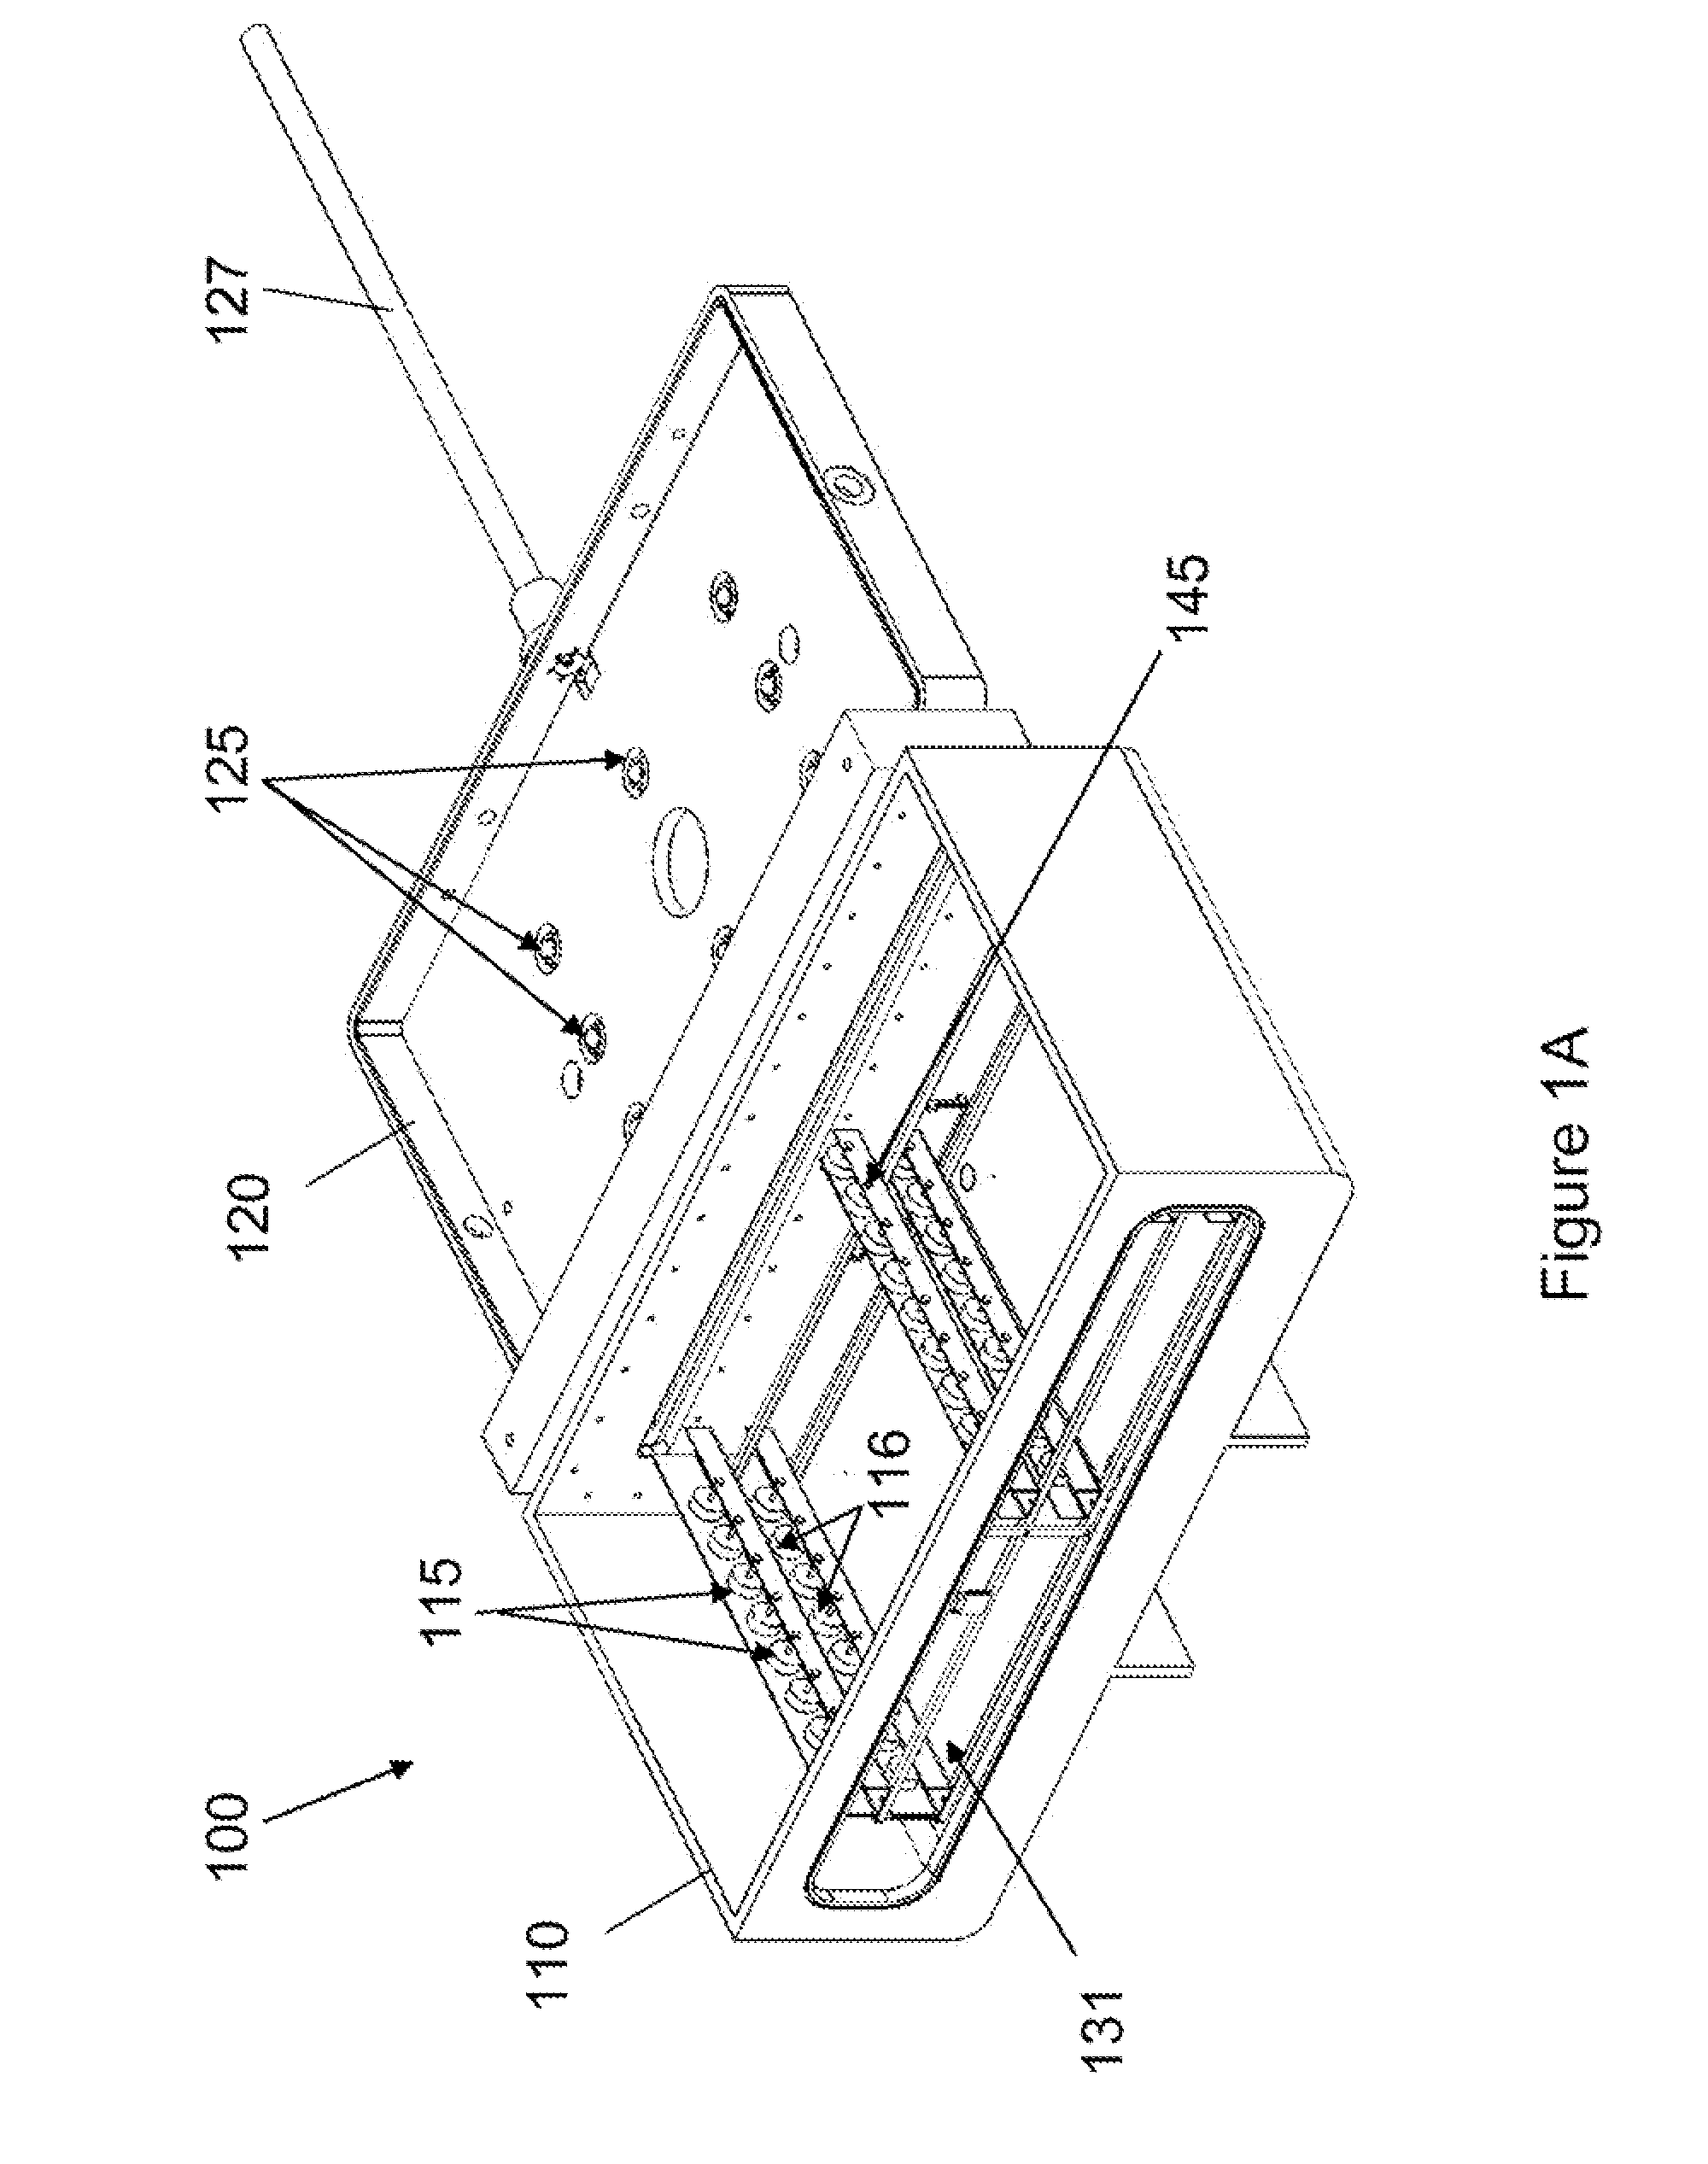 Substrate processing system having improved substrate transport system